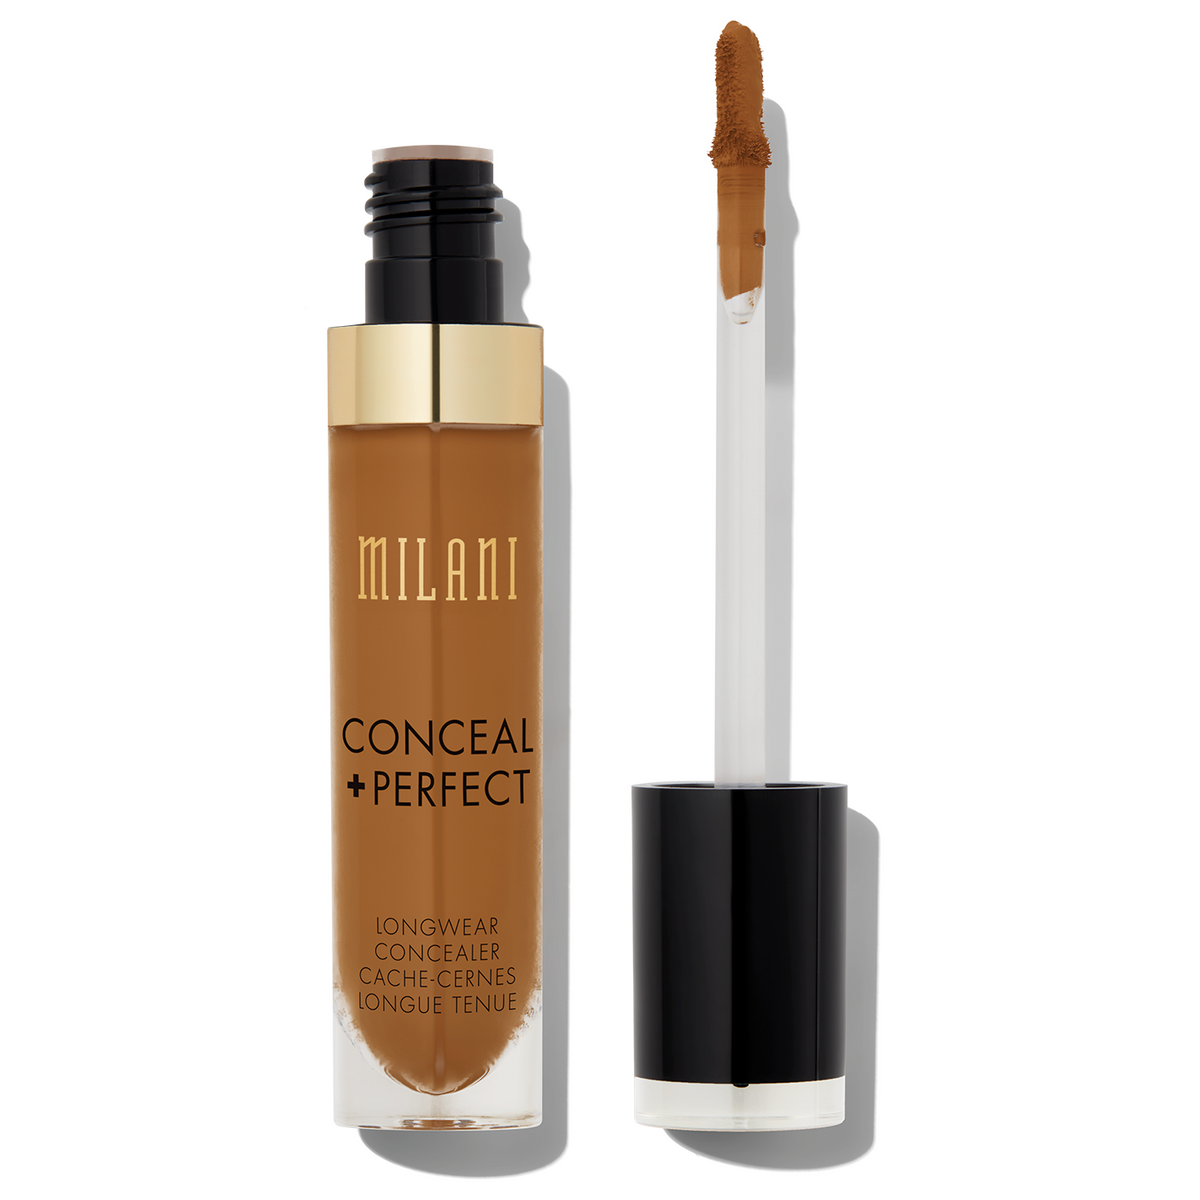 MILANI Conceal + Perfect Long-Wear Concealer - Warm Almond #170